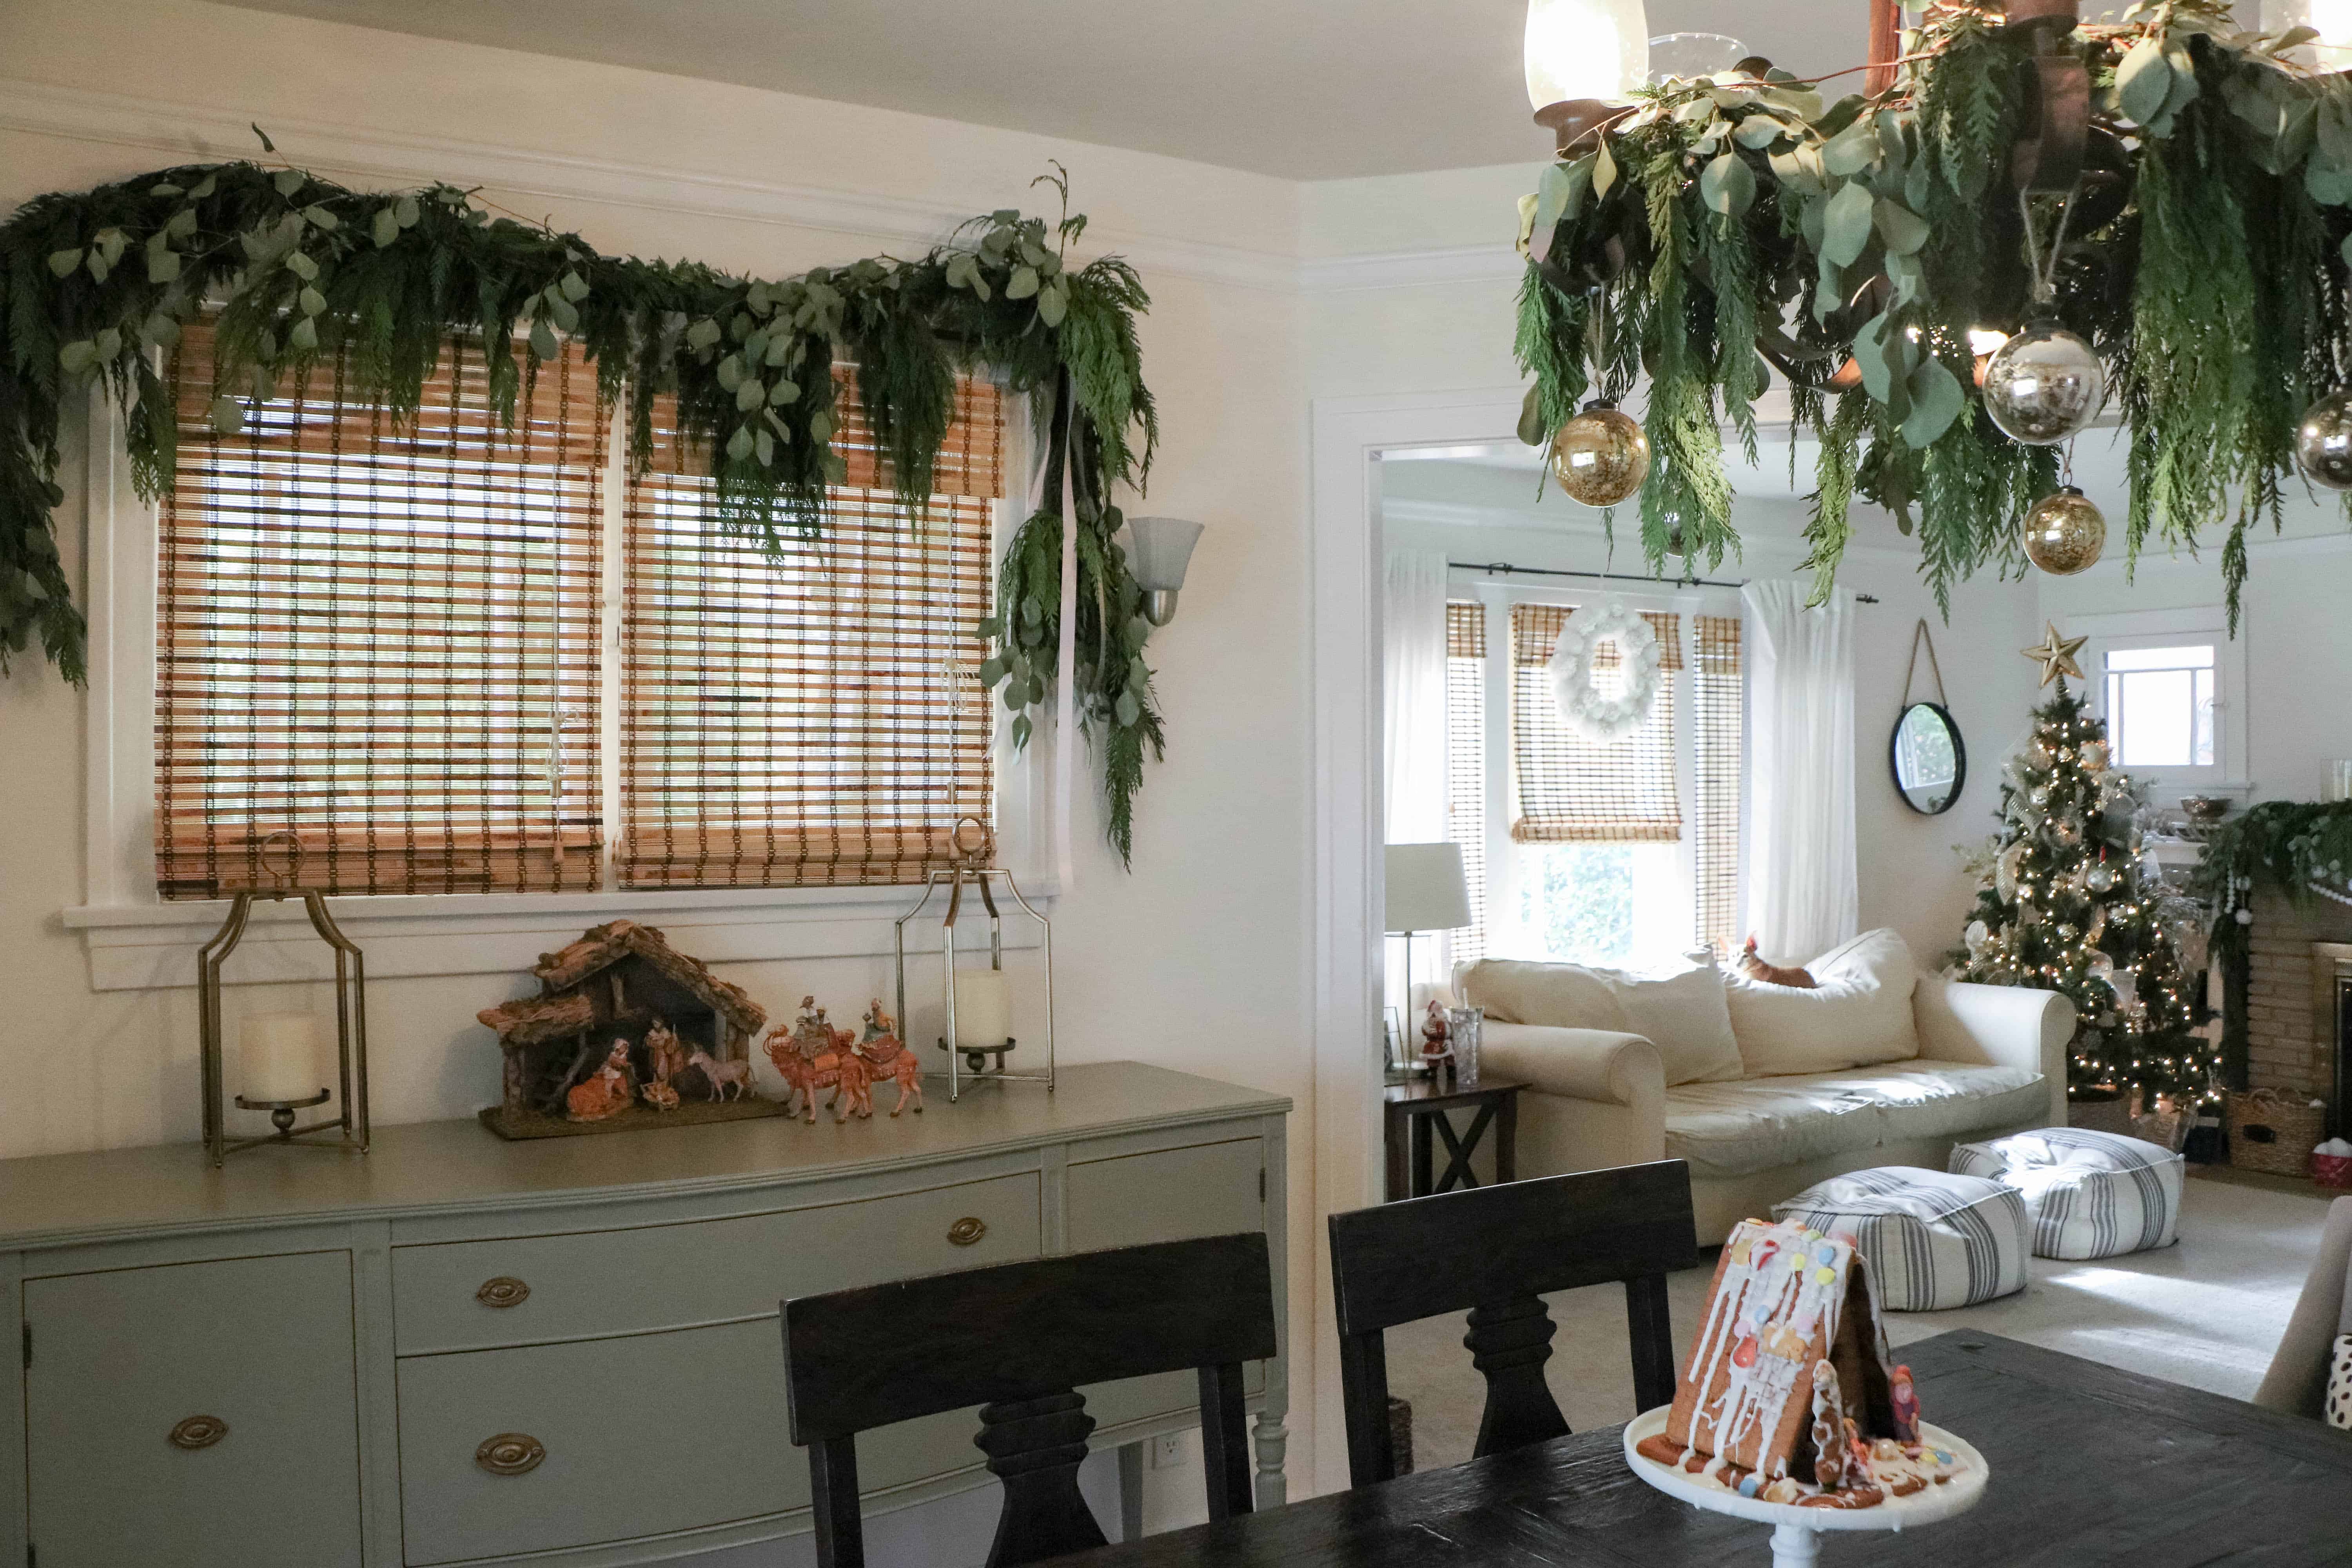 Holiday Home Tour 2016|Ahrens at Home